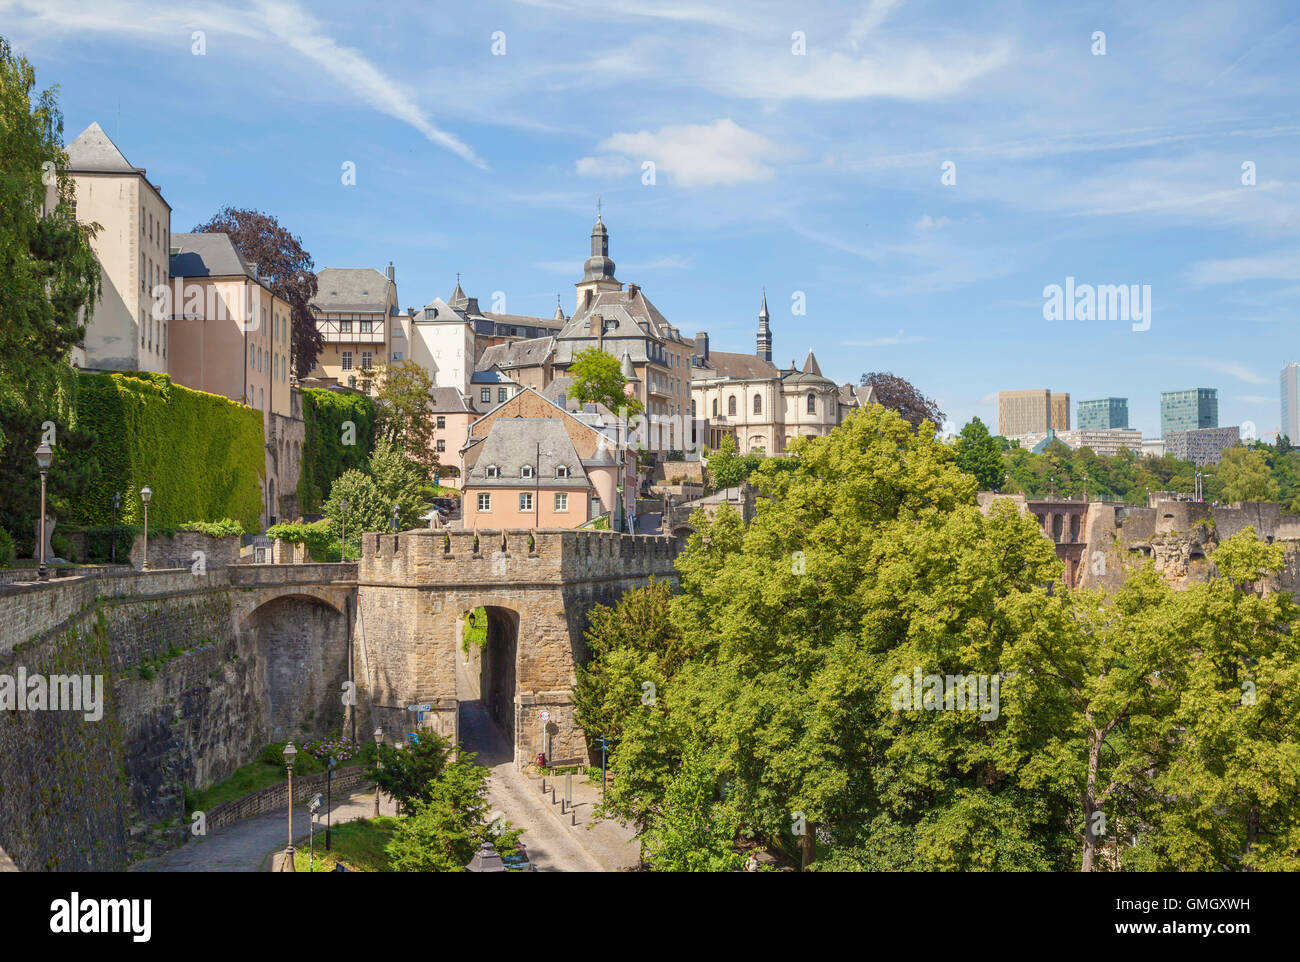 Old town and Fortifications in the City of Luxembourg Stock Photo